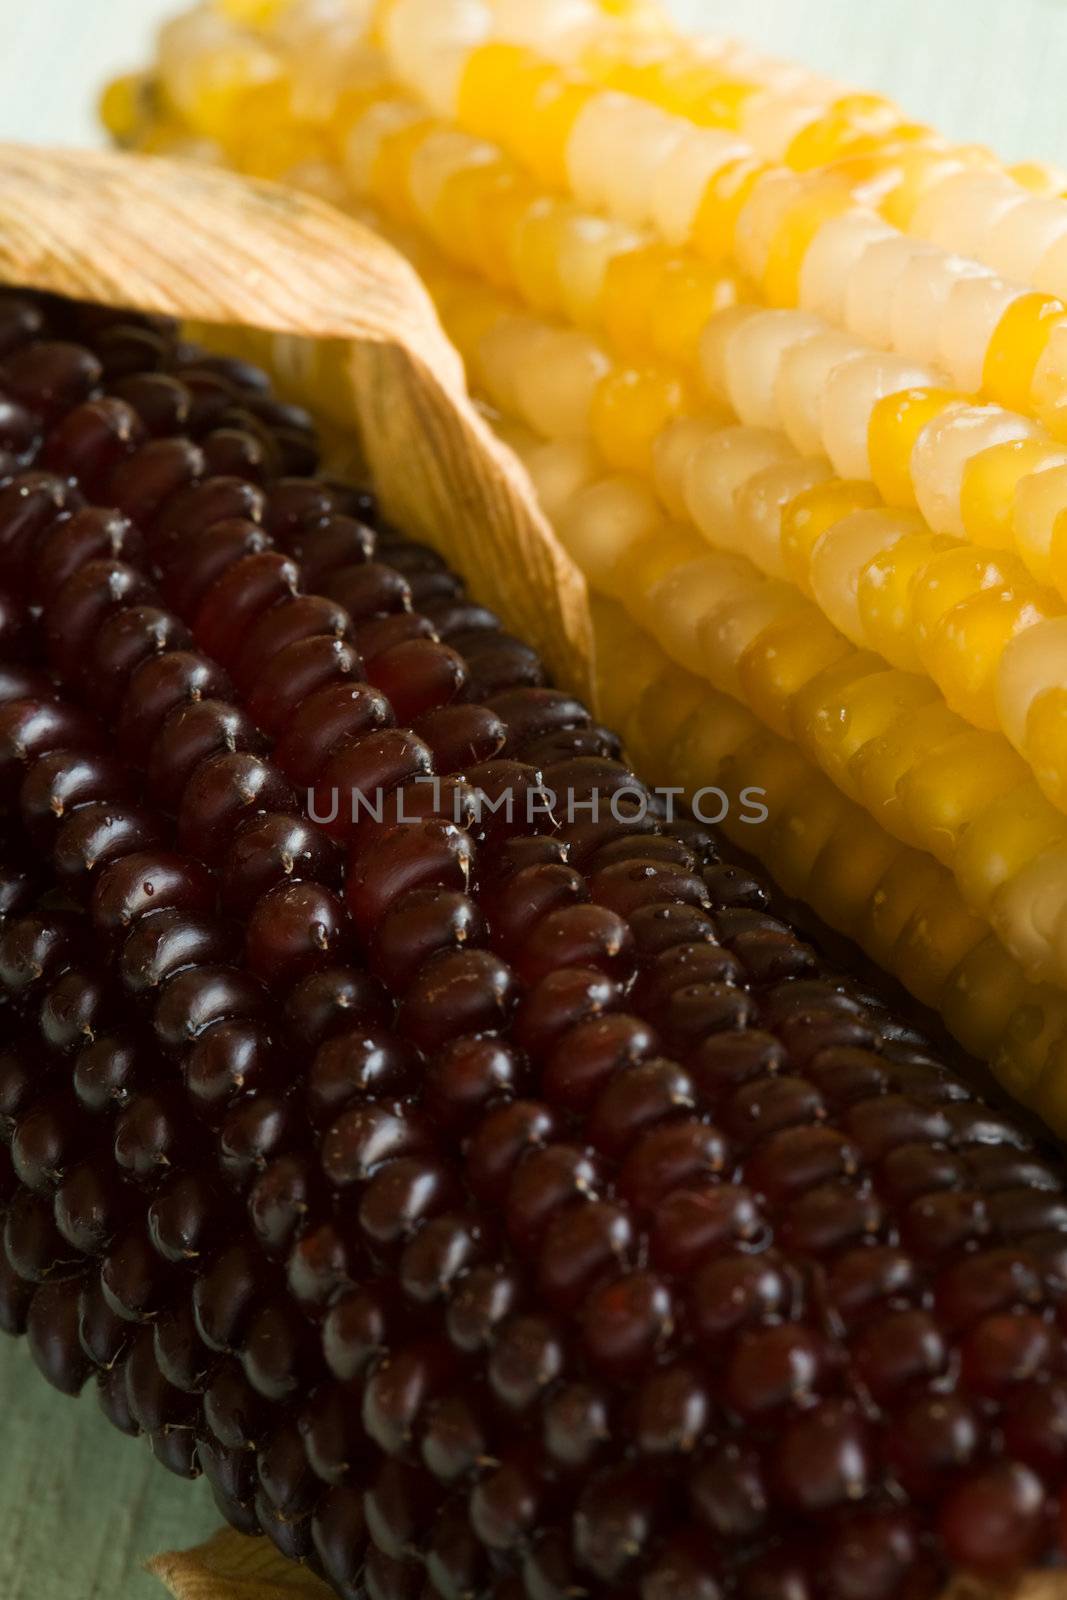 Two corn ears on a table, close-up